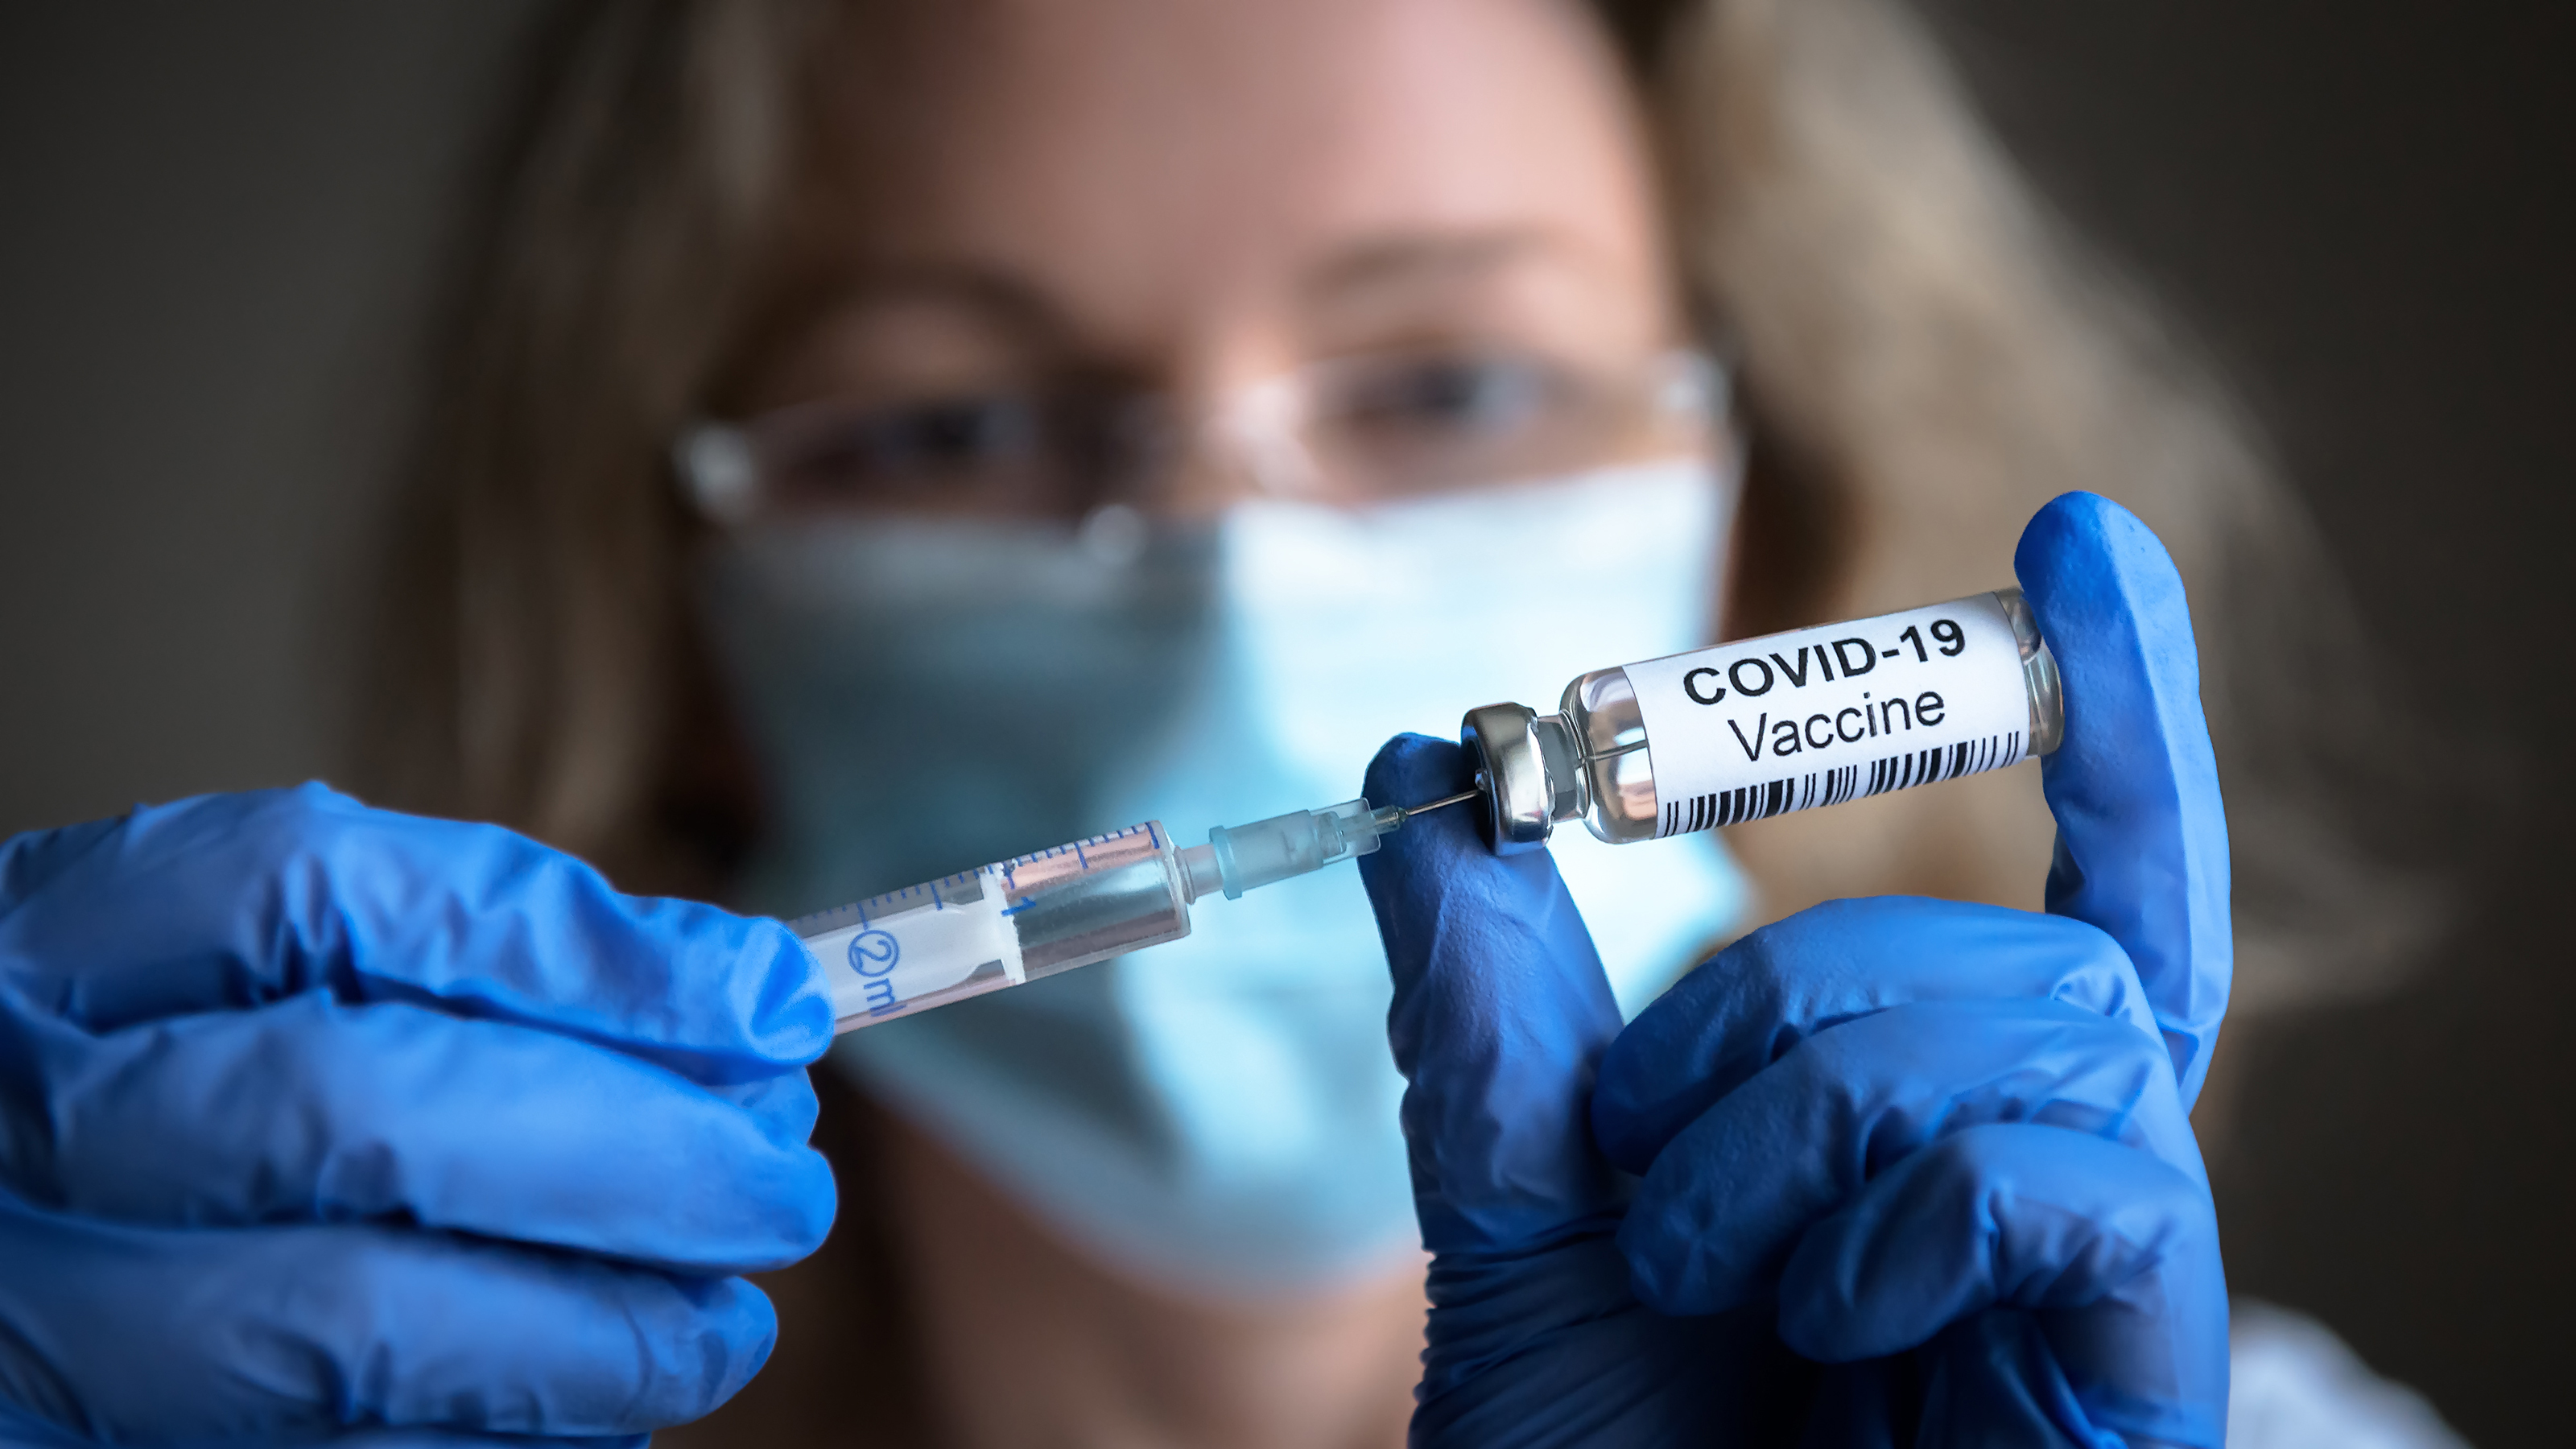 New Survey Gathers Residents’ COVID-19 Vaccination Opinions